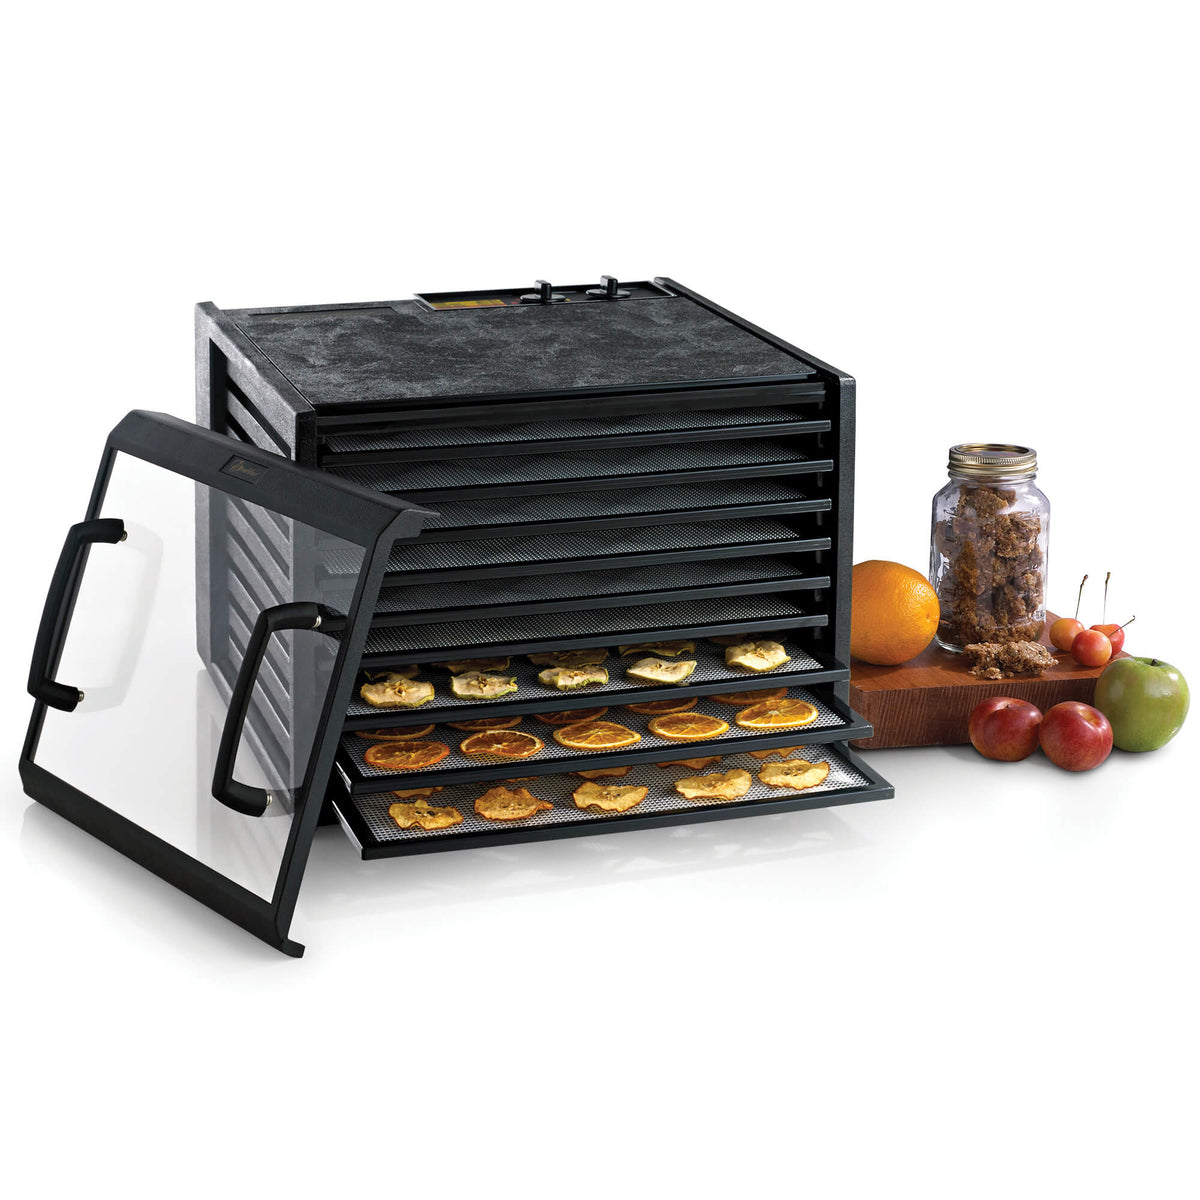 Excalibur 4926TCDB 9 tray dehydrator with clear door propped to the side and food on the trays.